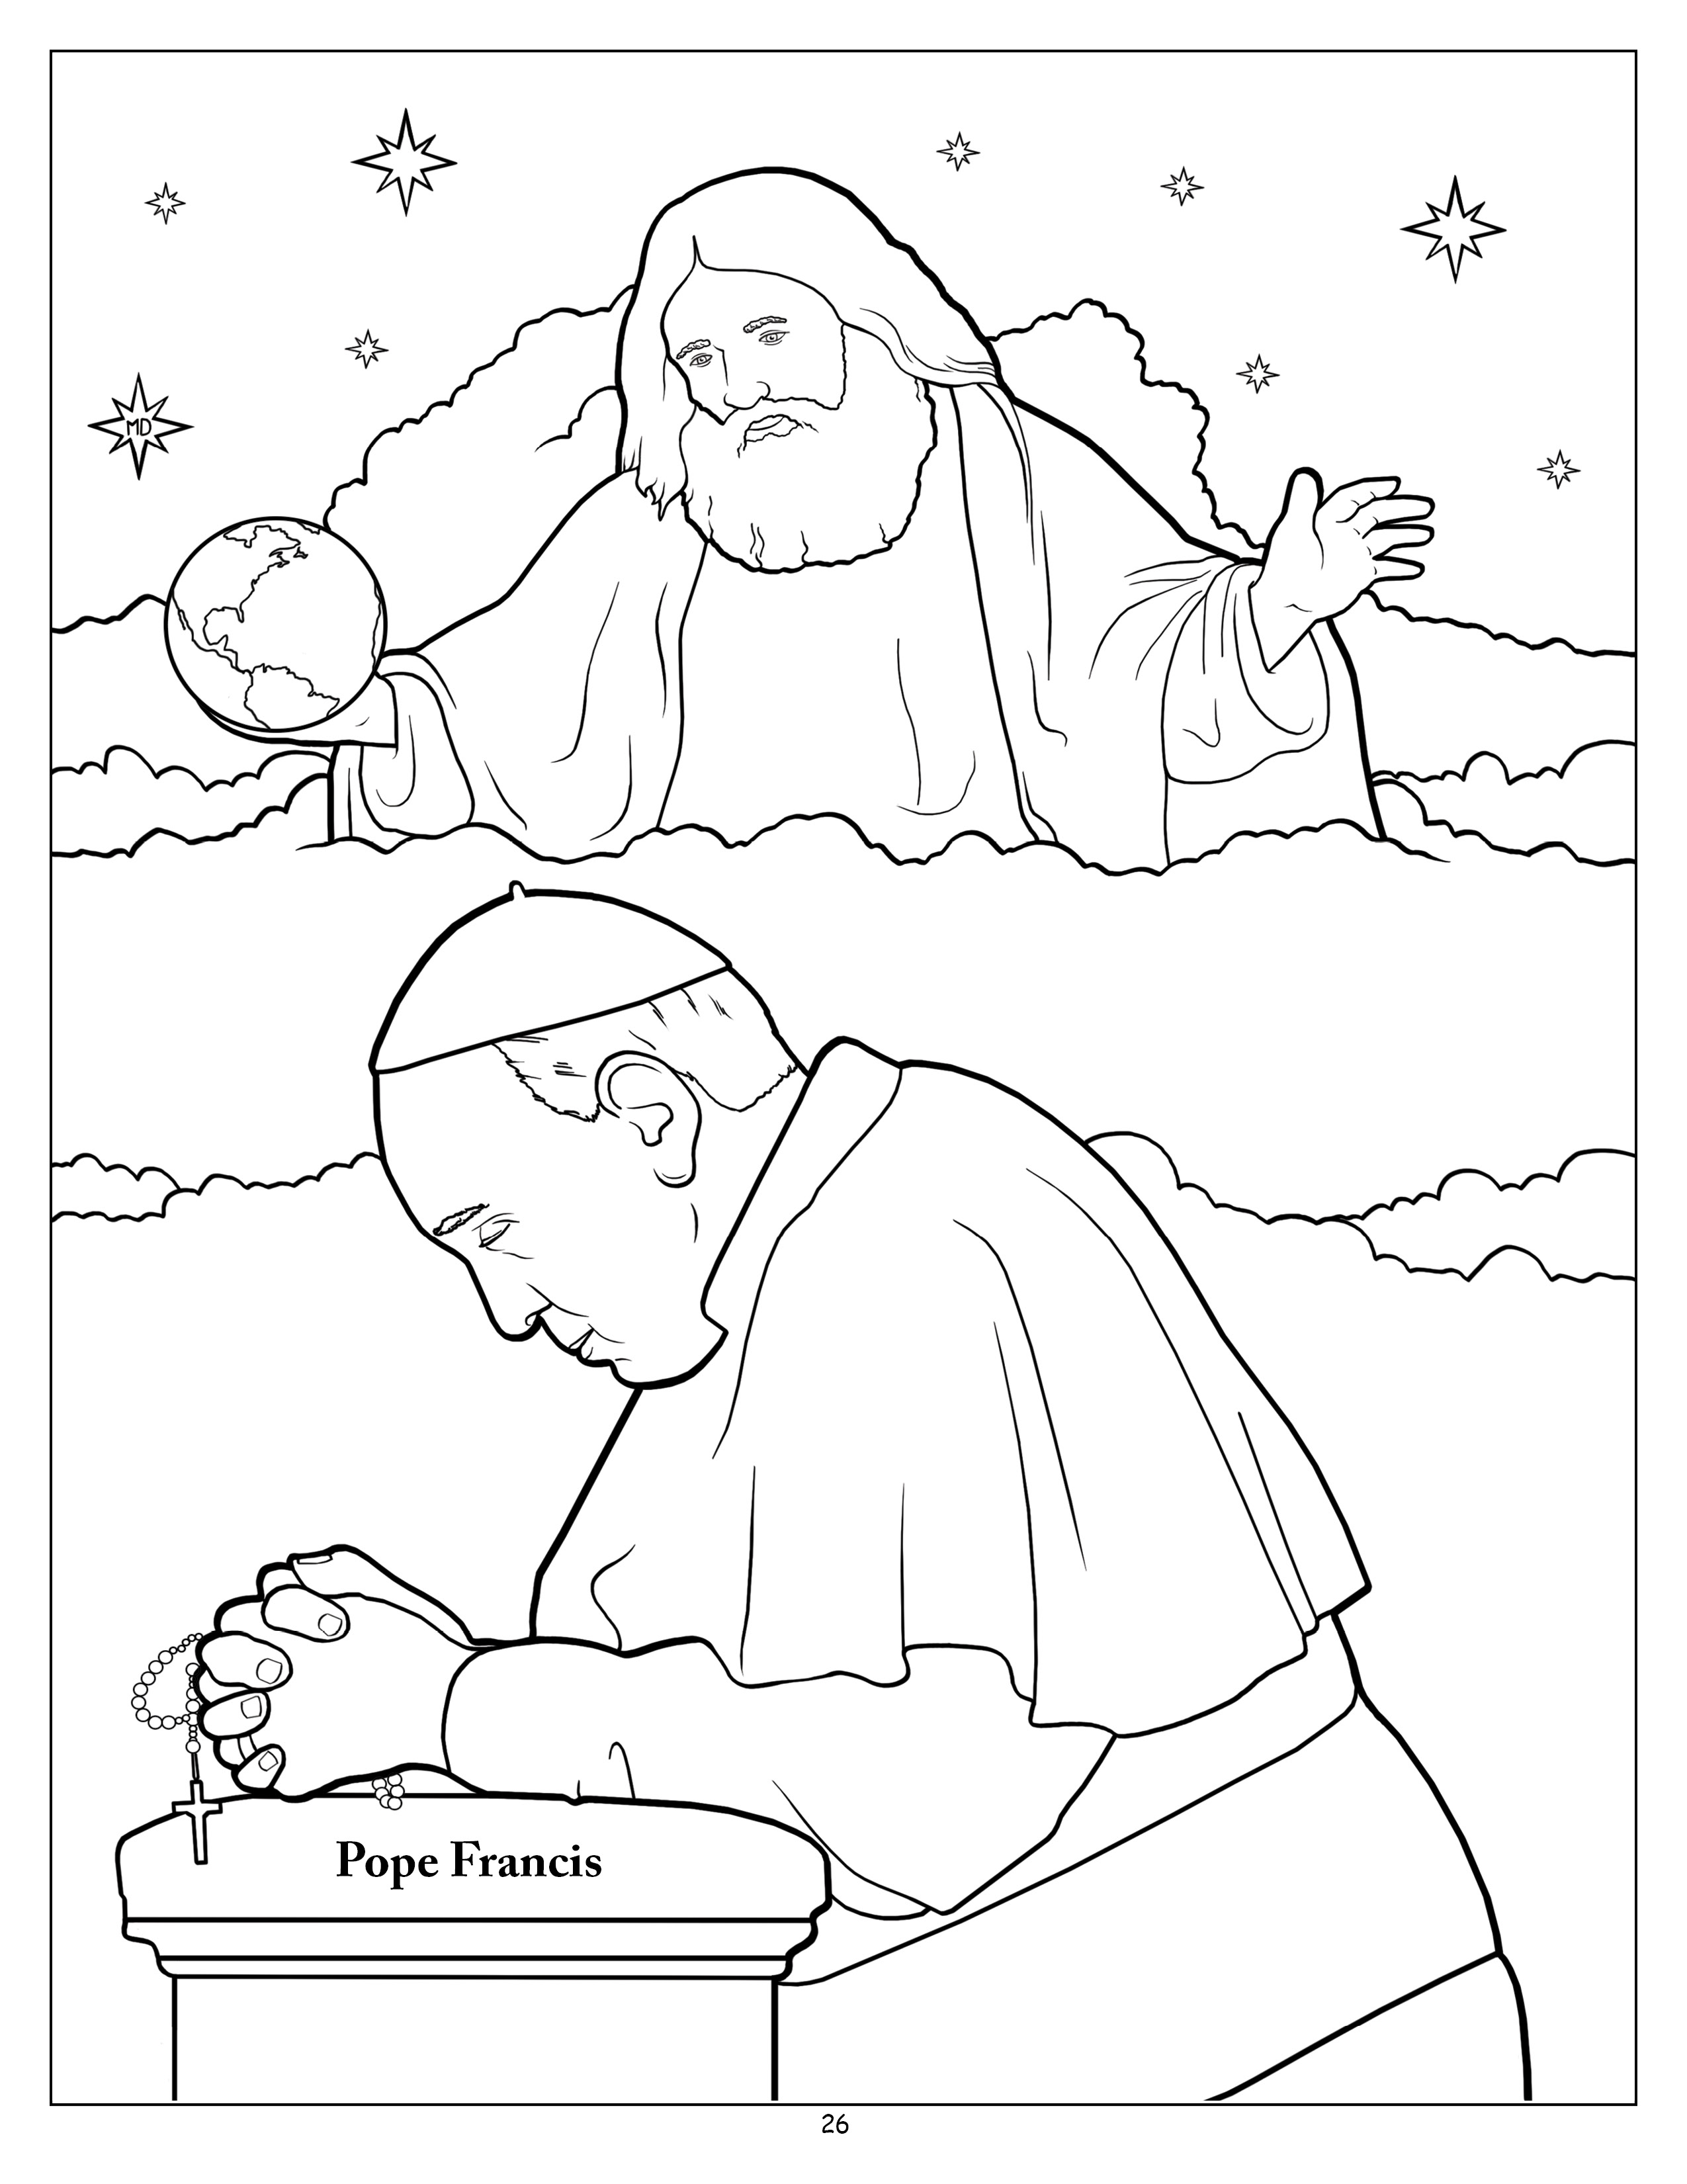 The Pope Francis Coloring and Activity Book The Holy See